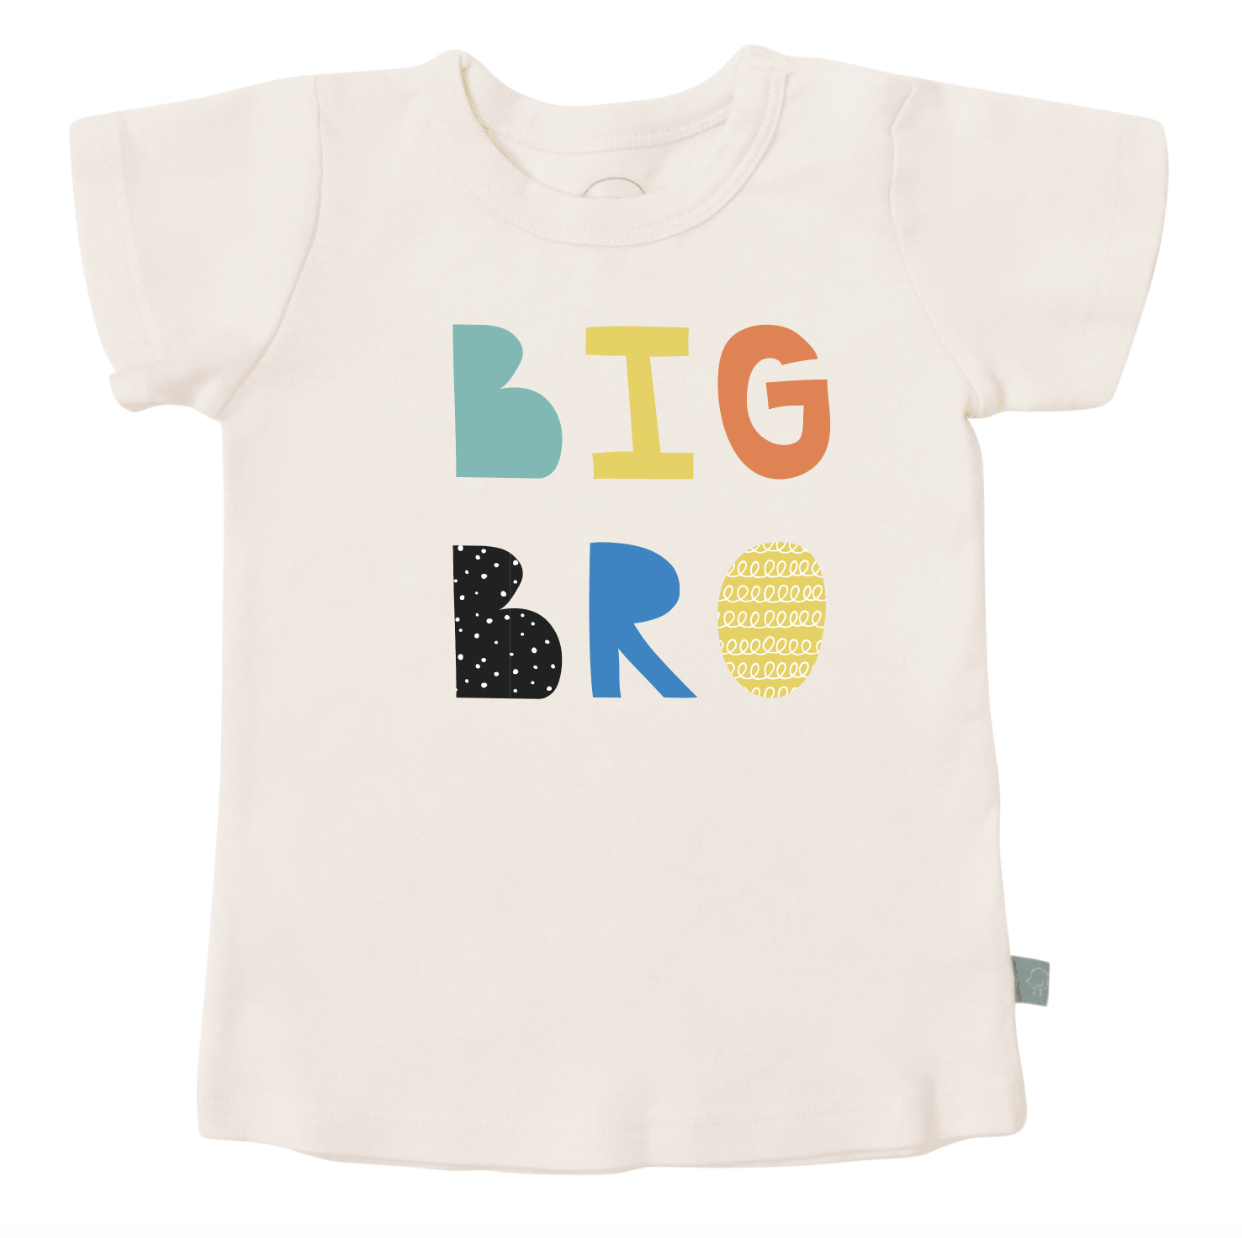 Each growing kiddo is unique, and whether the one in your life is a superhero or unicorn rider, princess or rebel, our all-new graphic tees for toddlers have an ador